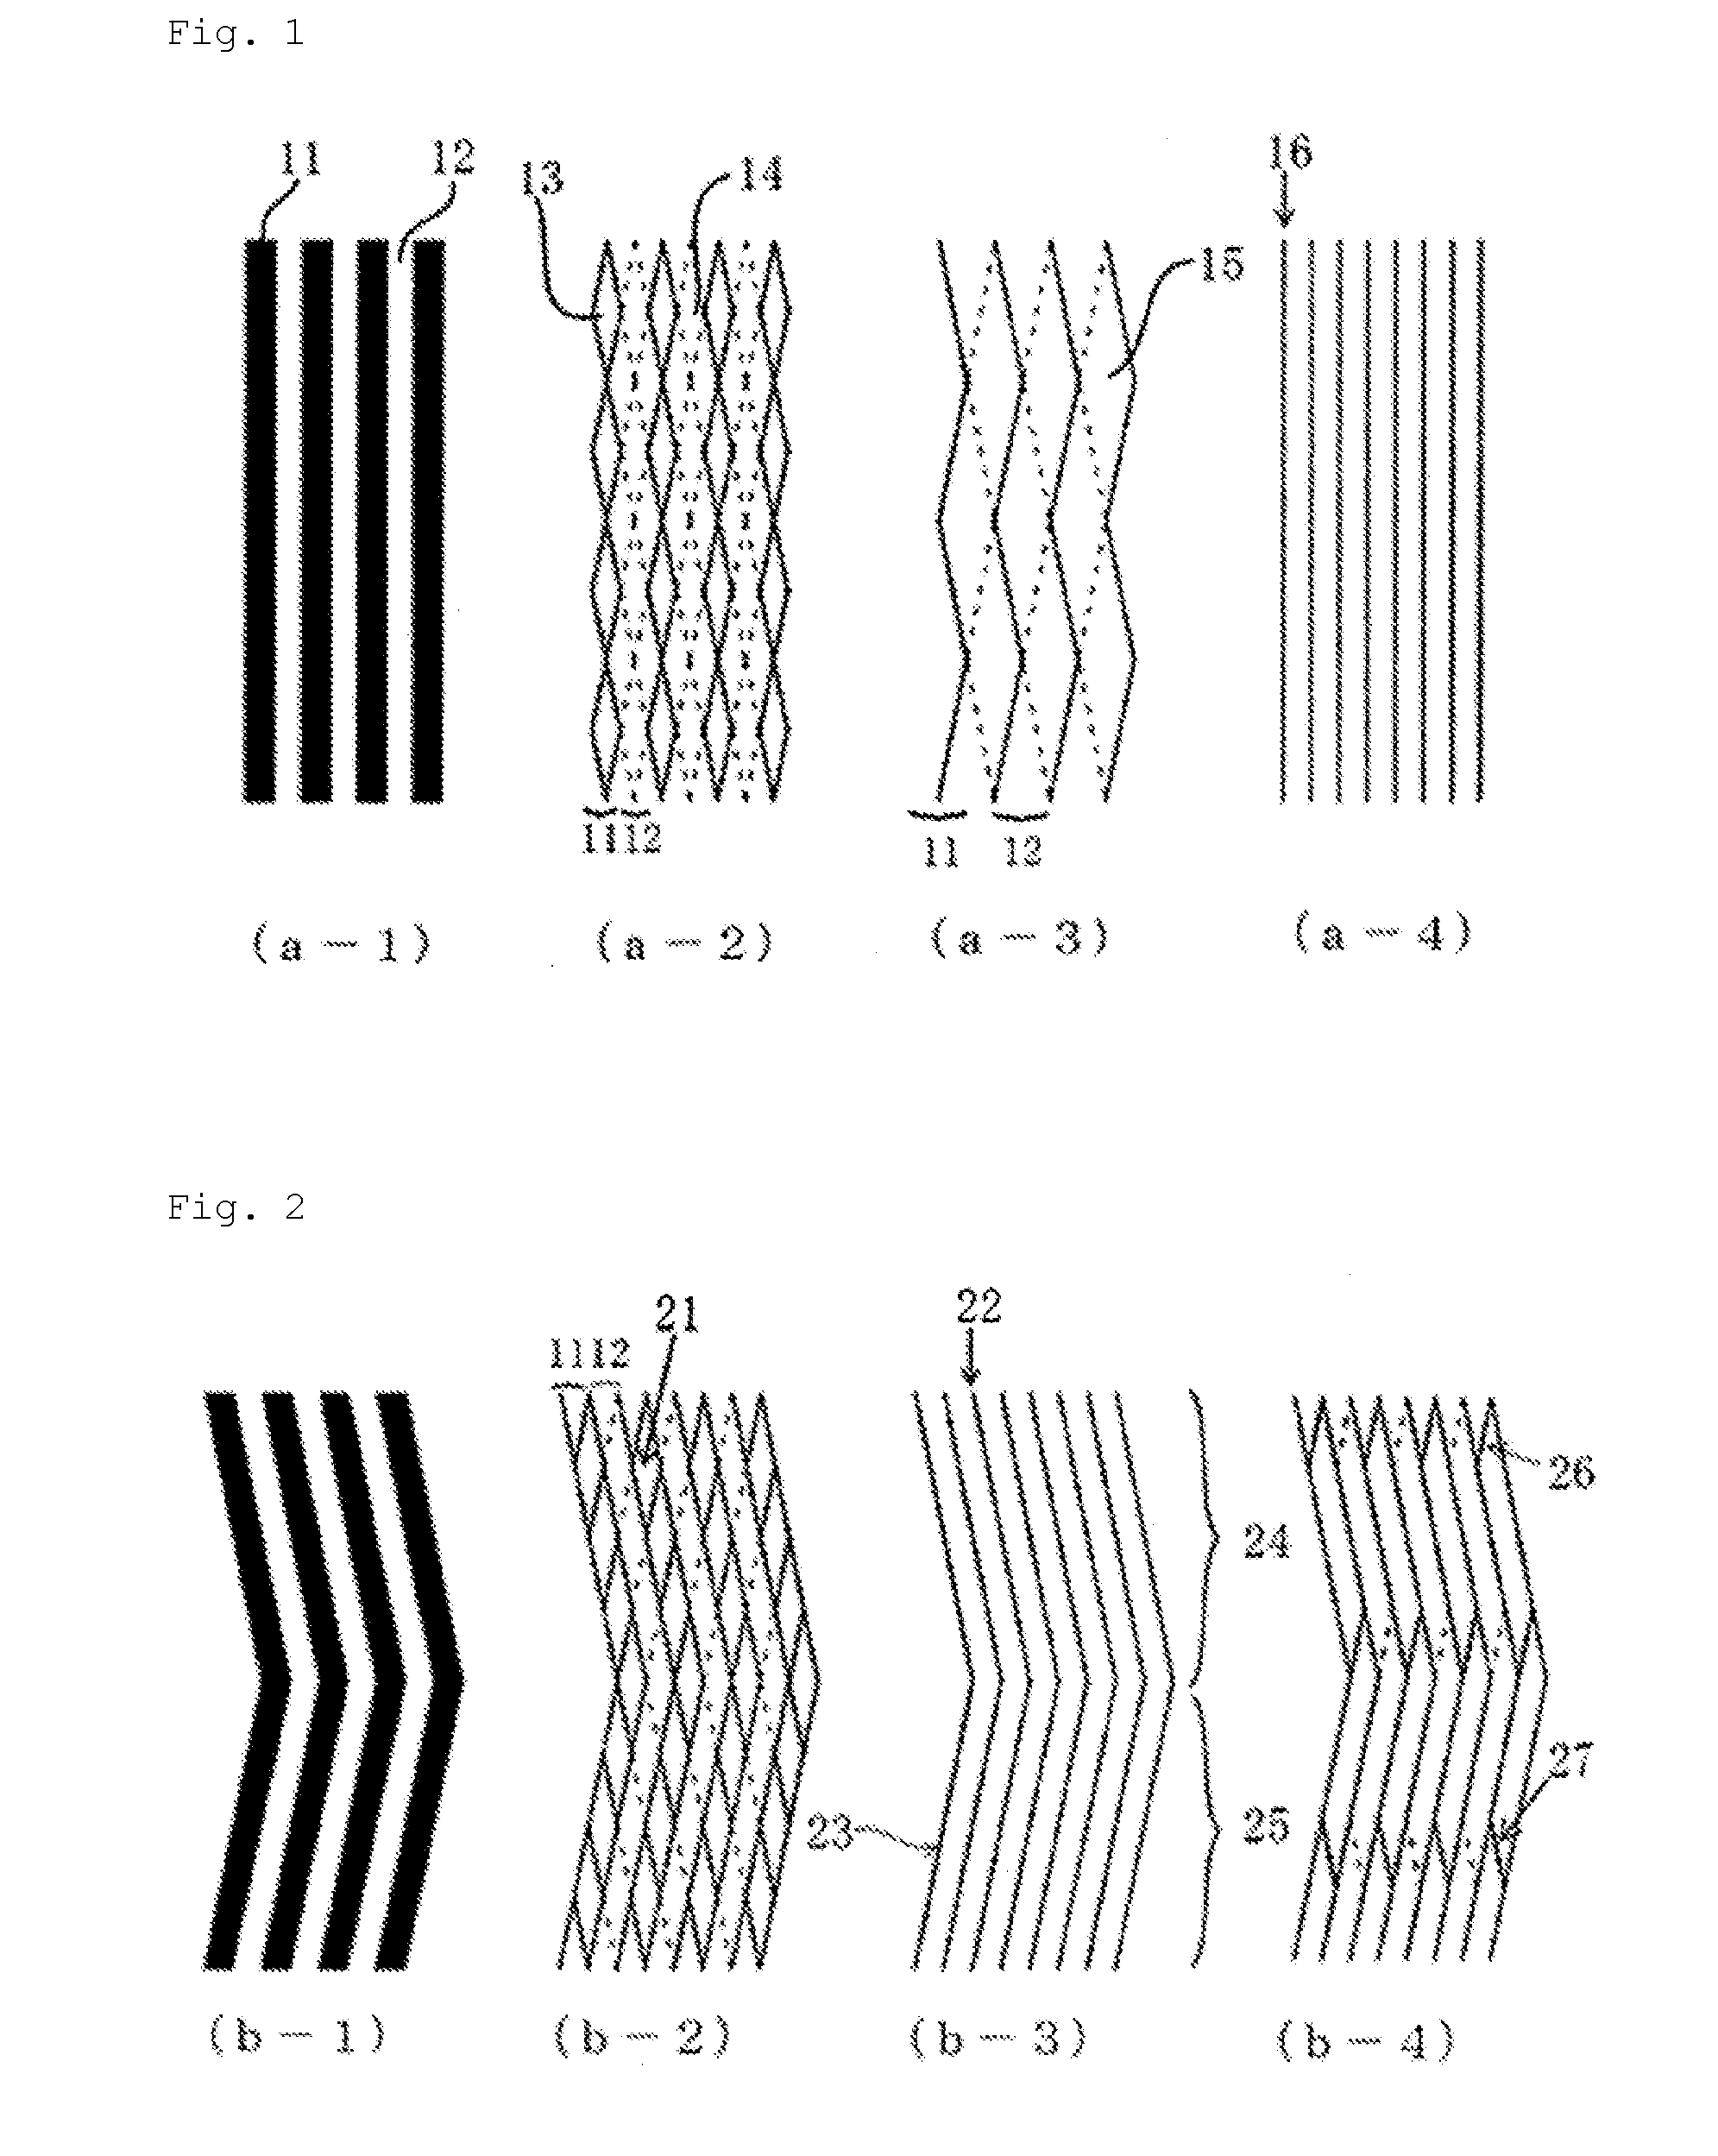 Conductive pattern and electrode pattern of single-layer capacitive touchscreen